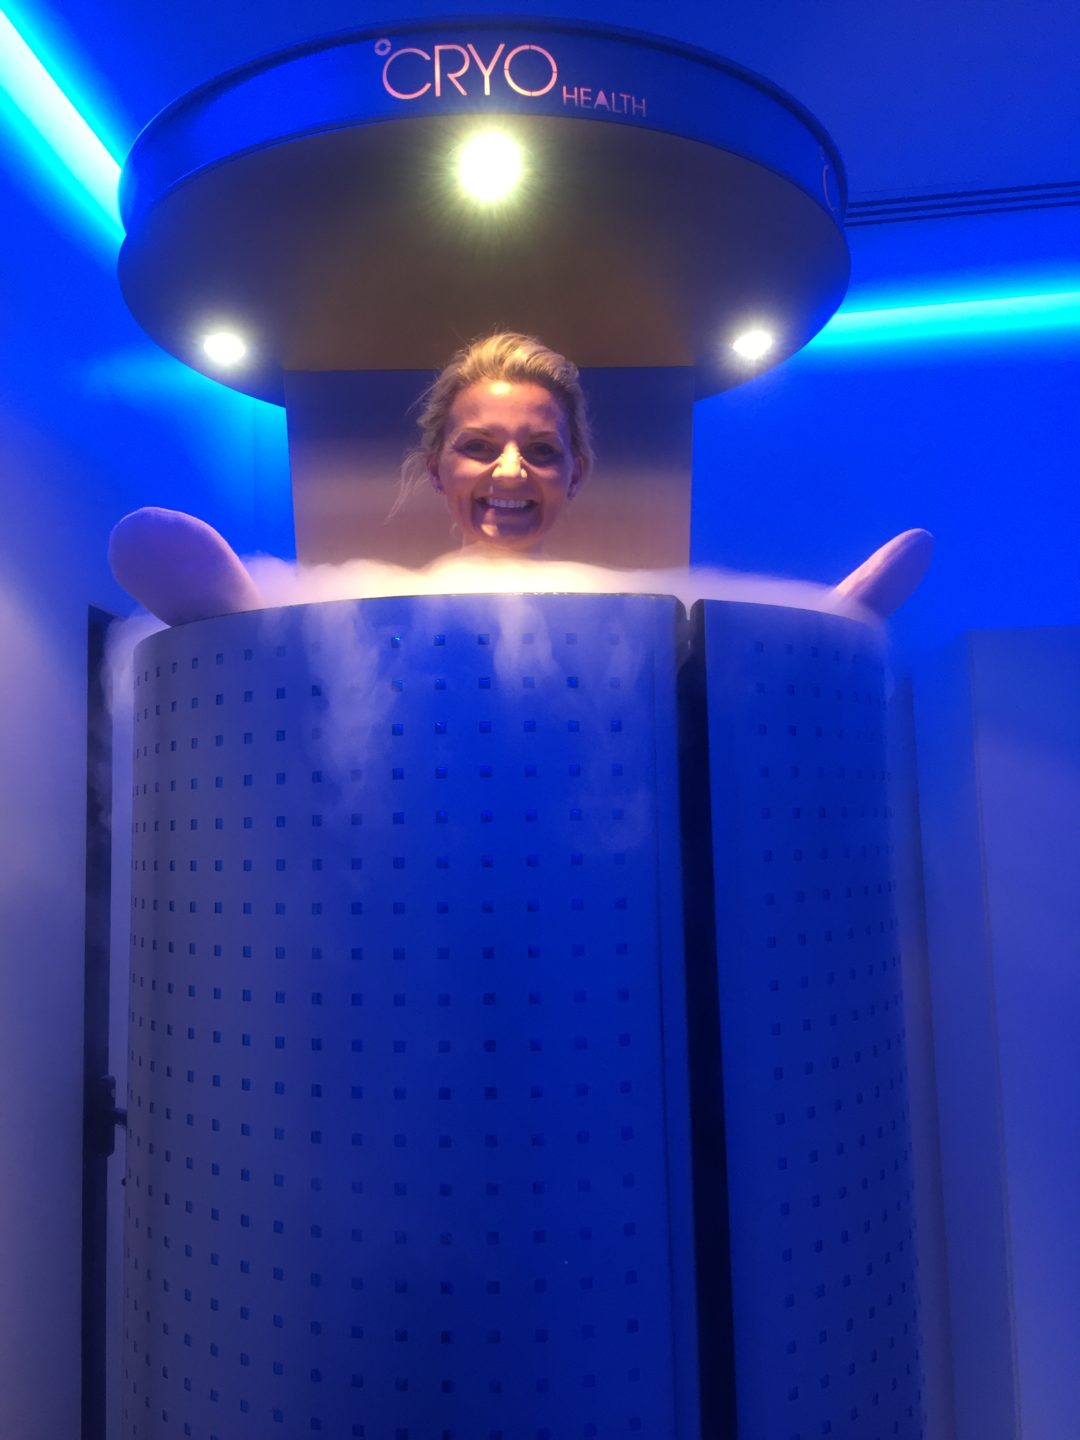 Kitted out in the CRYO chamber